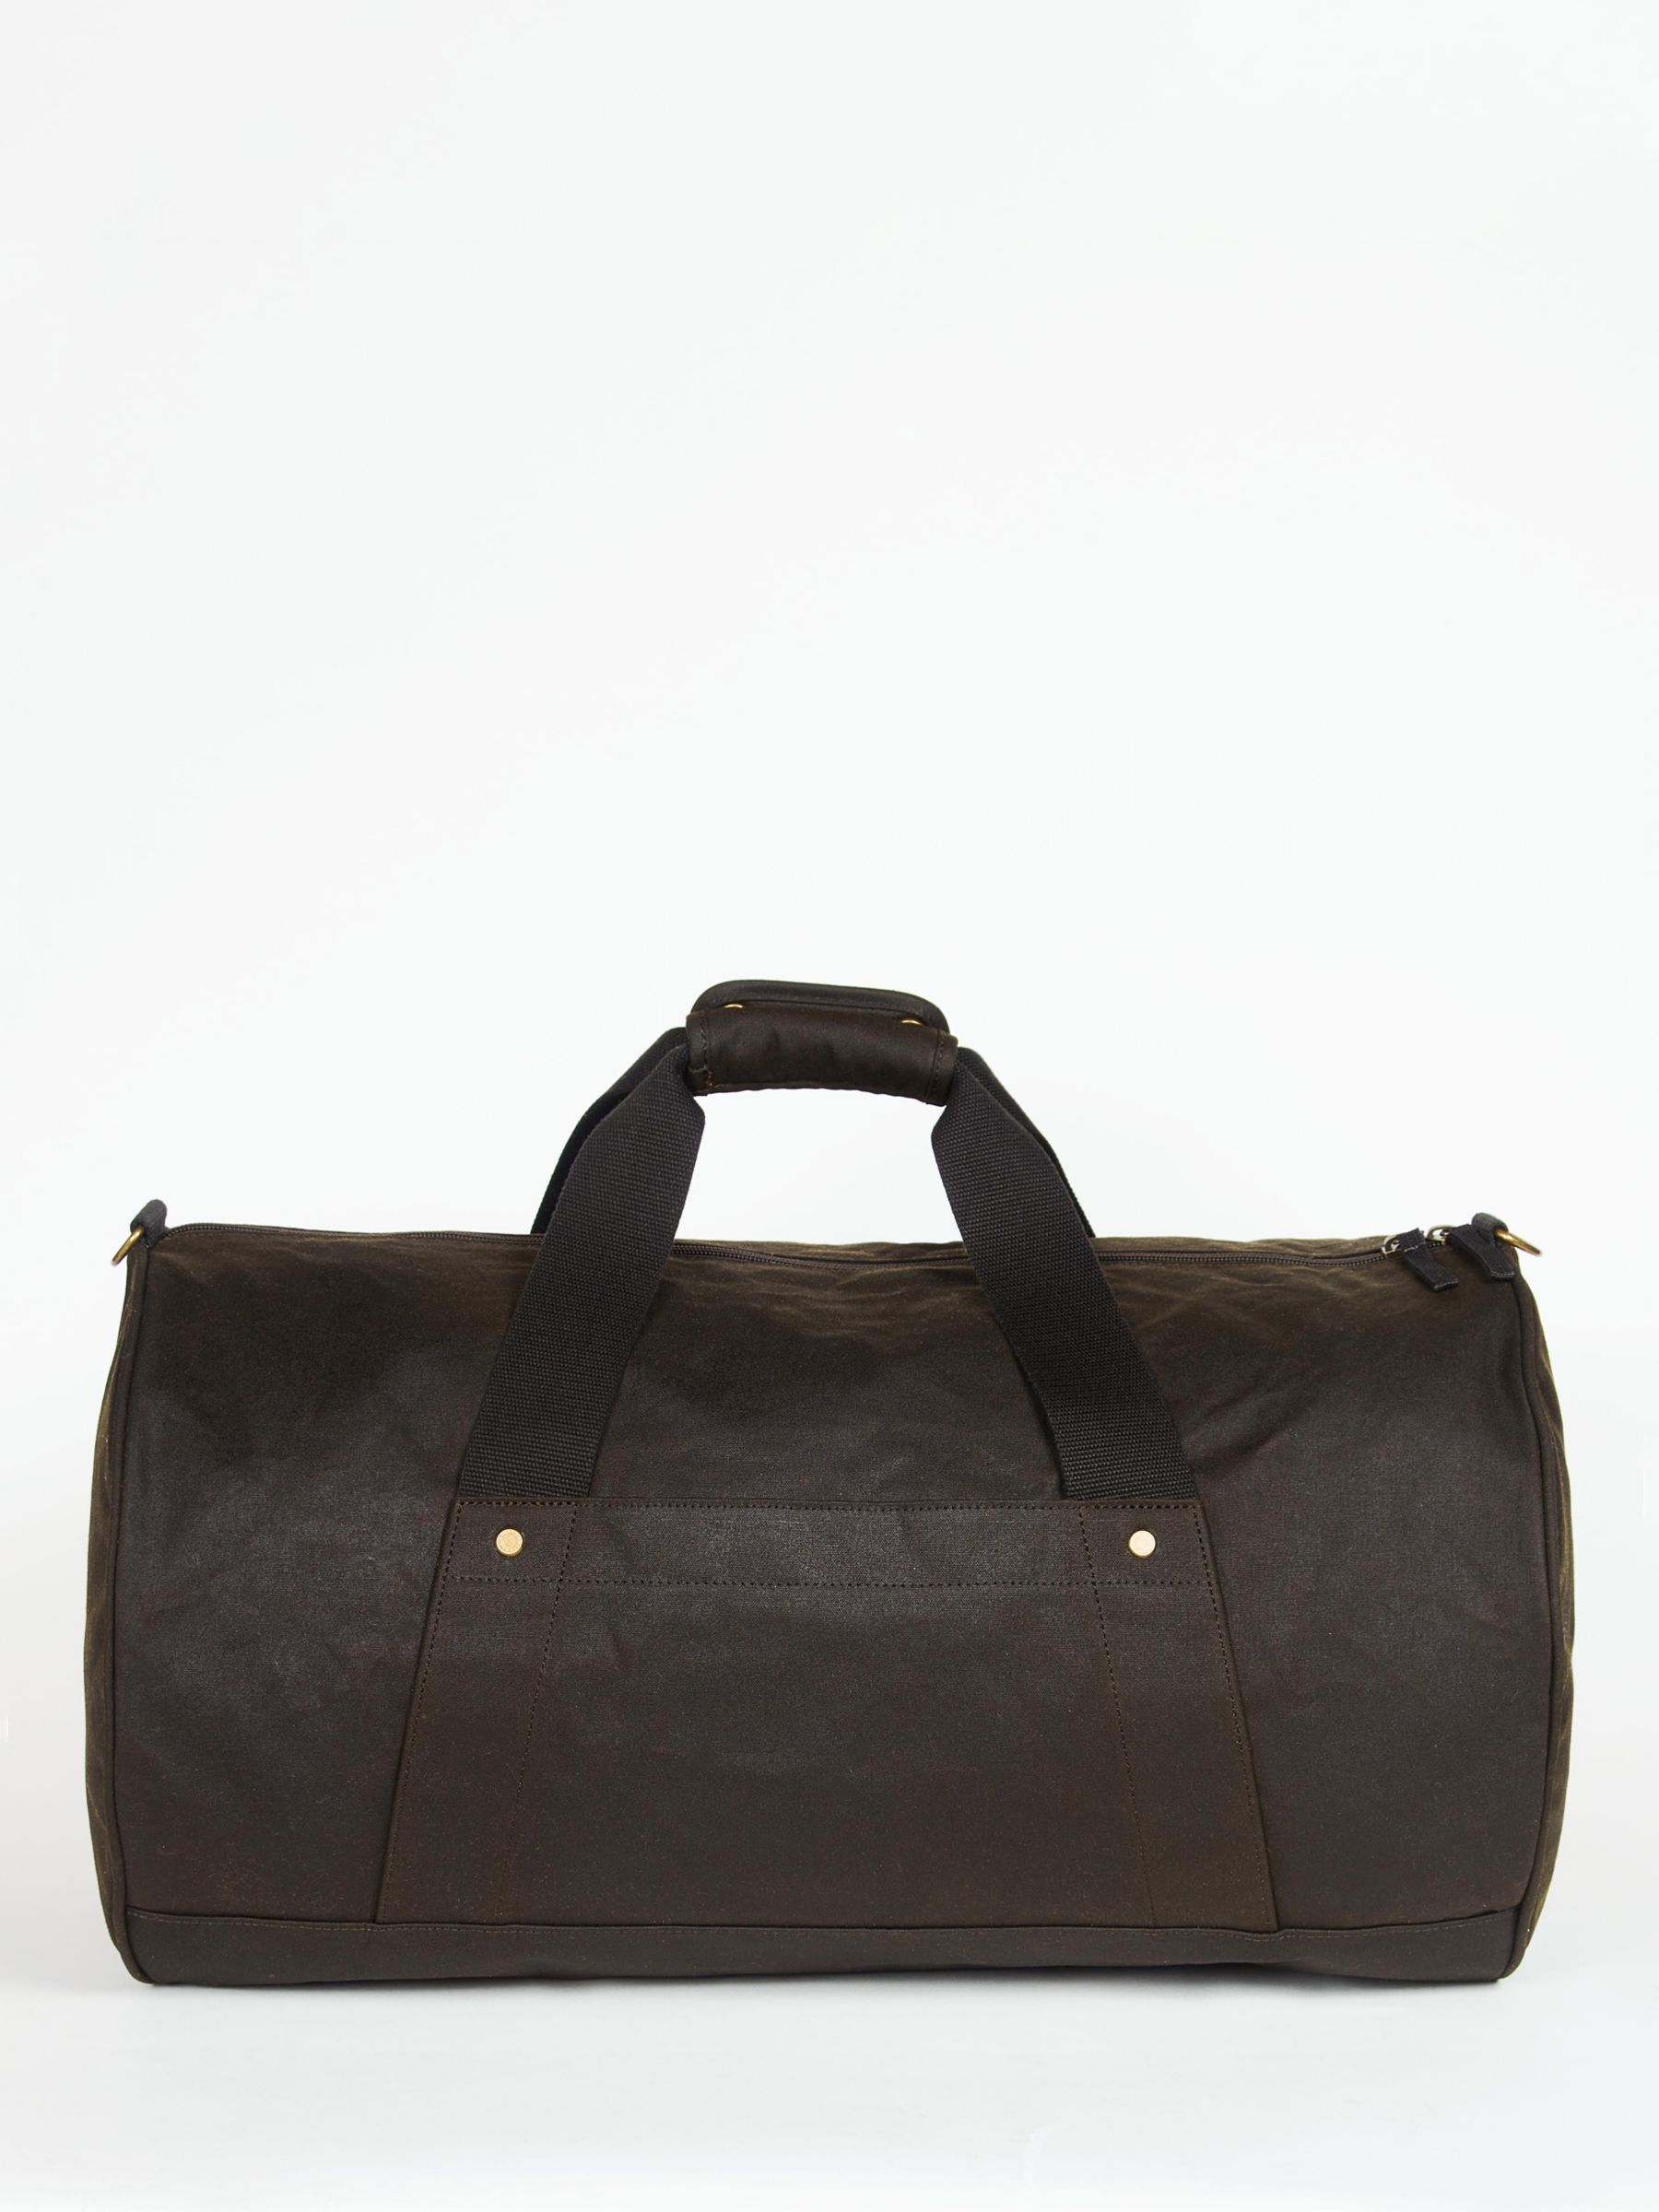 Barbour Barrell Wax Cotton Holdall, Olive at John Lewis & Partners